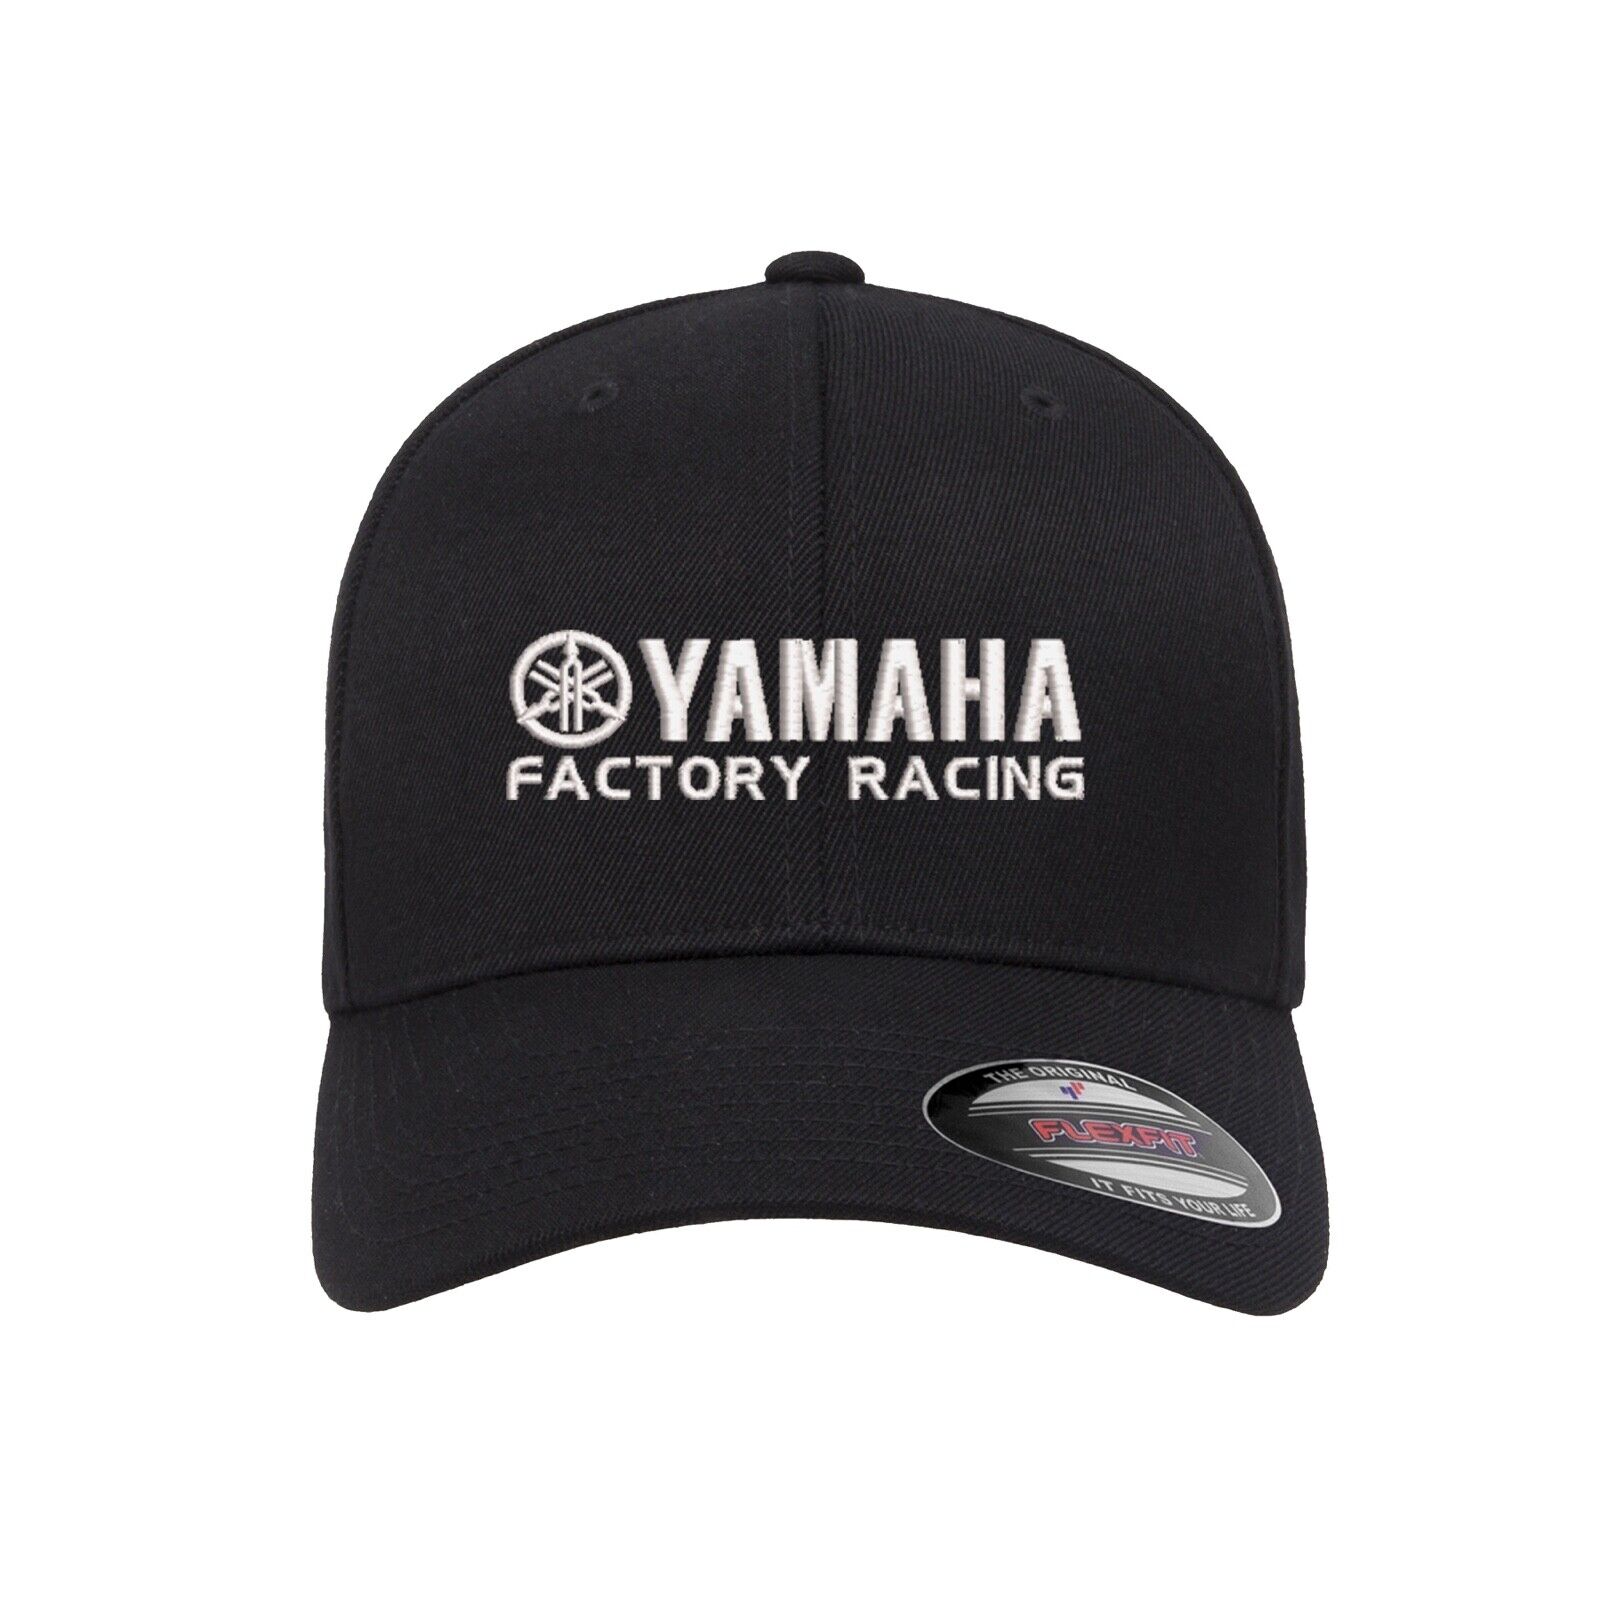 YAMAHA Factory Racing Logo Embroidered Flexfit Hat Flat and Curved 